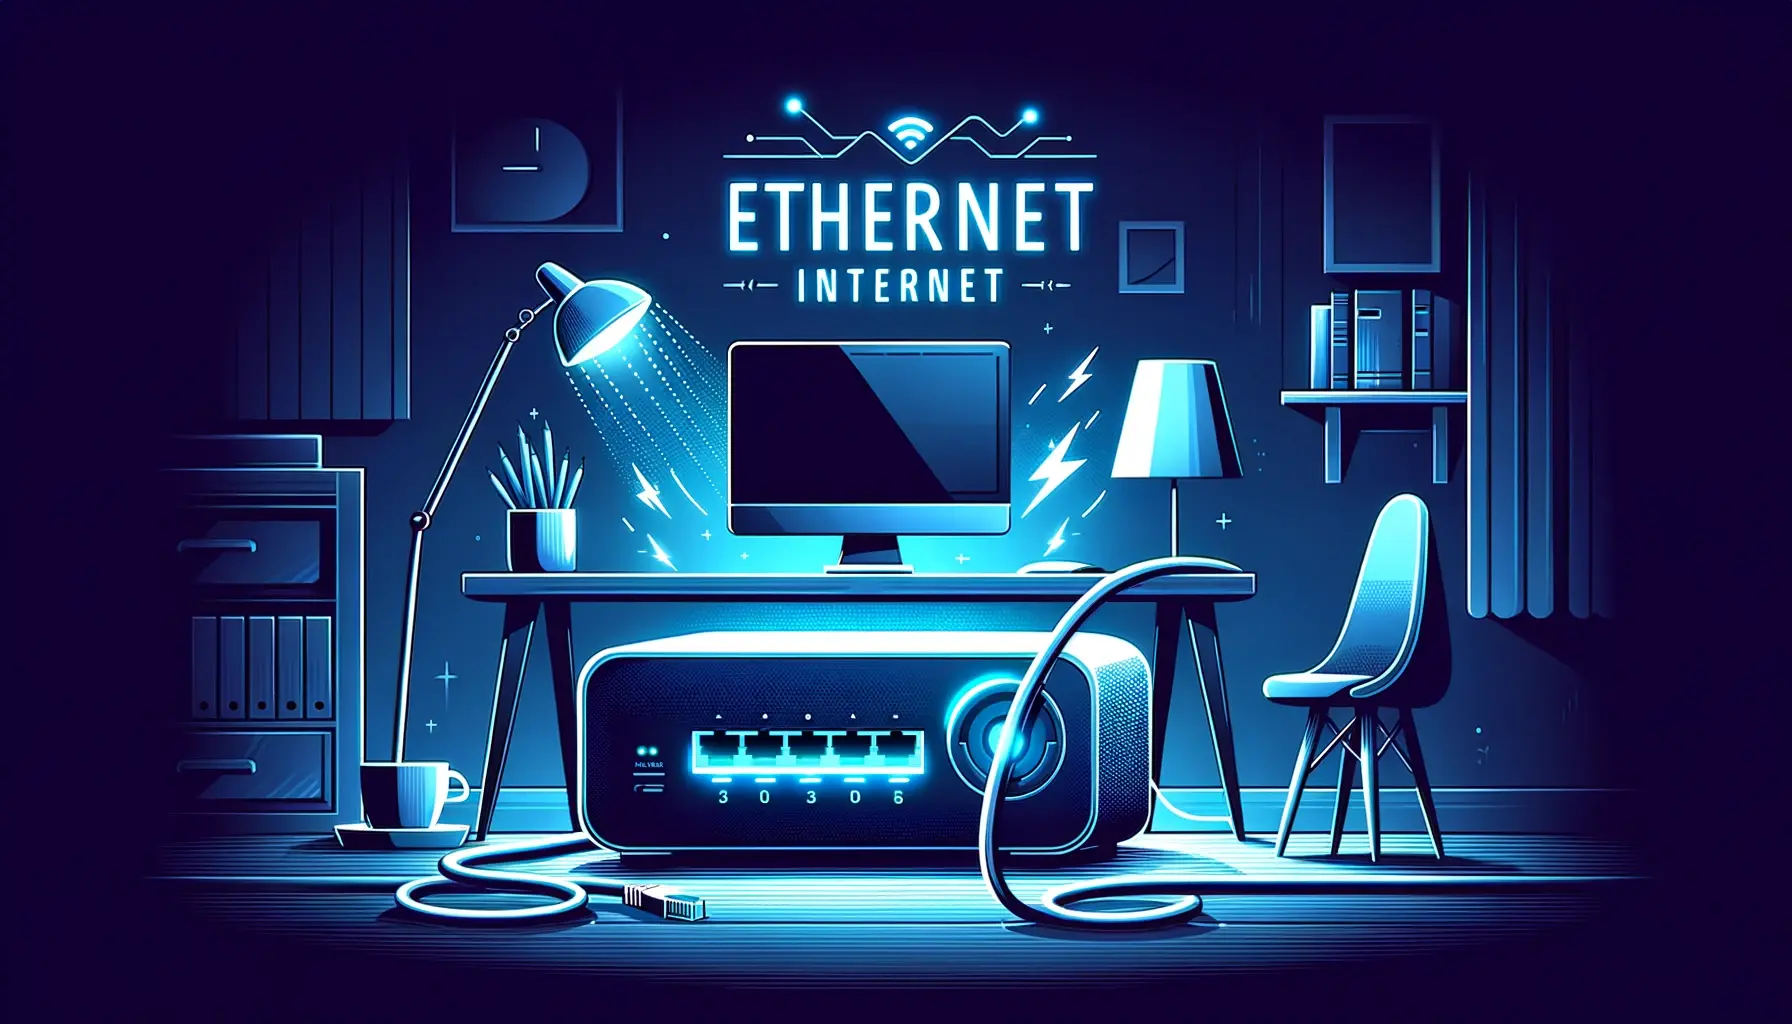 What is Ethernet Internet?